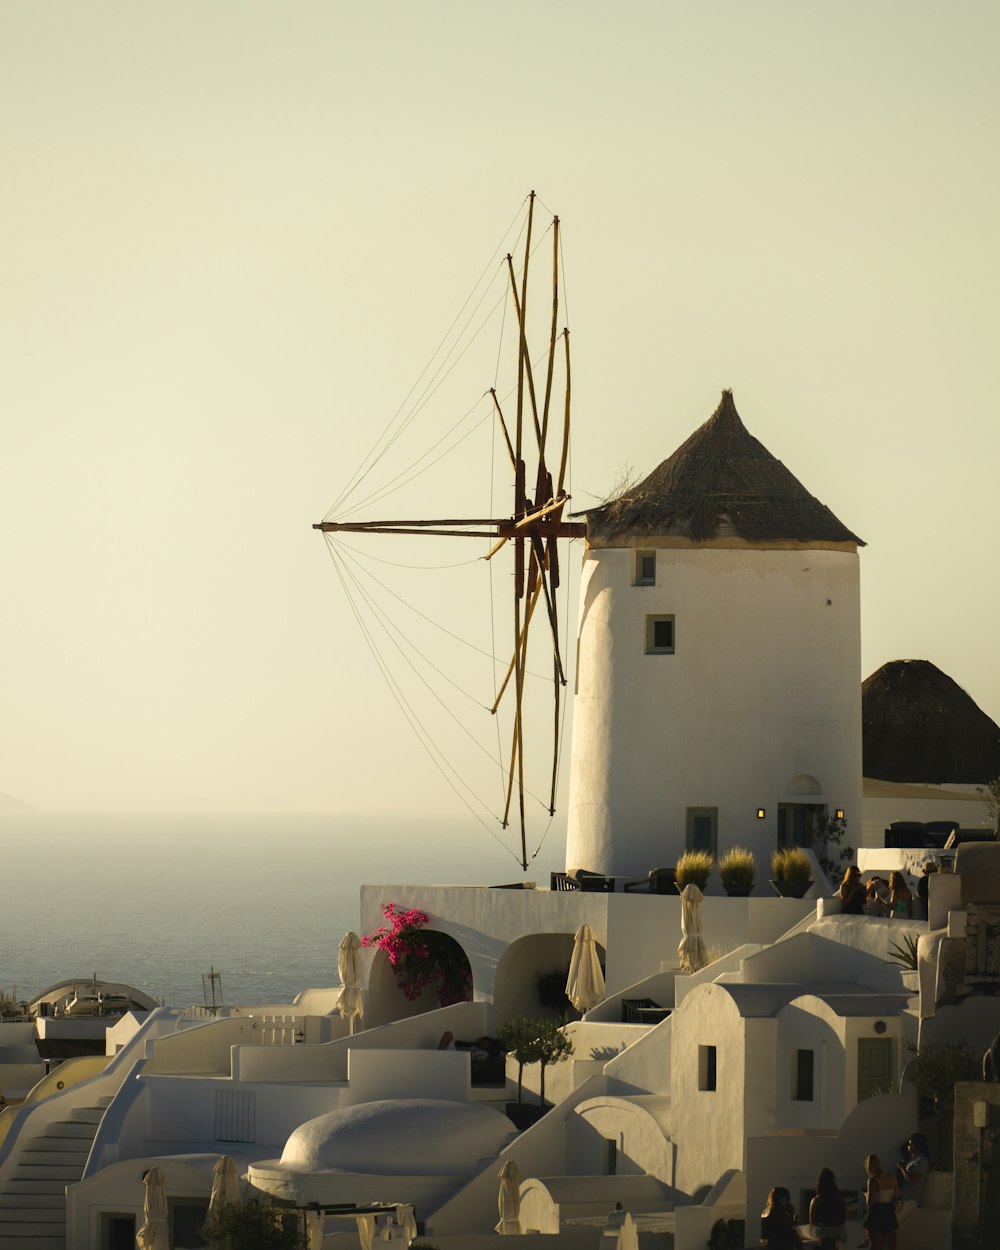 a windmill on top of a building near the ocean